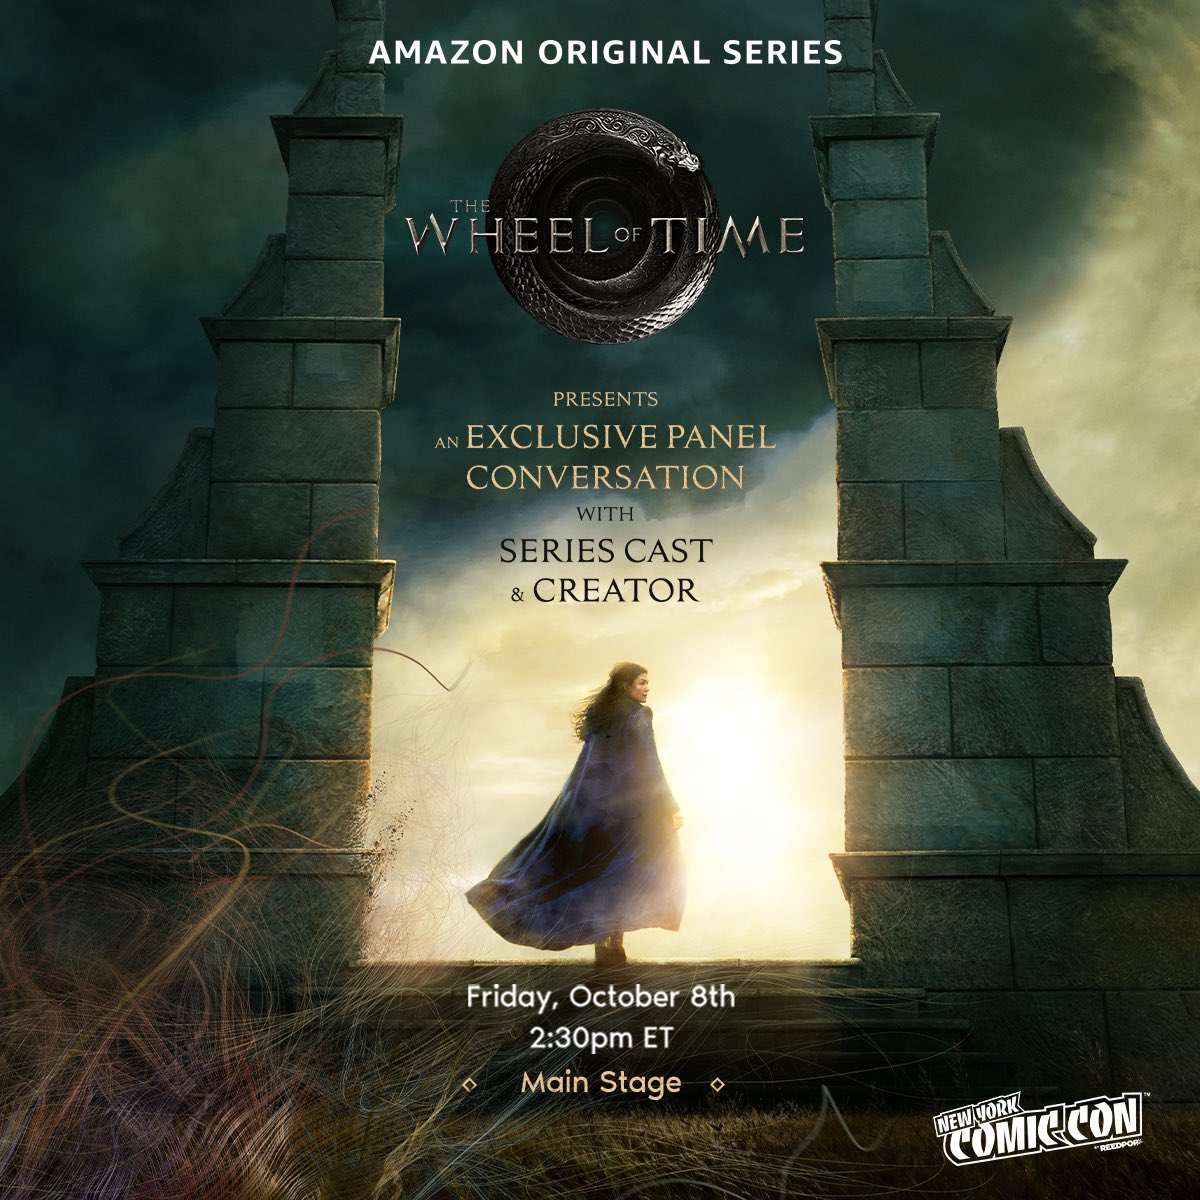 The poster depicts the iconic moment from The Eye of the World. Moiraine looks over her shoulder at the audience as she steps through a Waygate into the unknown. She is inviting us to go on a journey with her. The words "Amazon Original Series The Wheel of Time Presents an Exclusive Panel Conversation with Series Cast and Creator. Friday, October the Eighth two-thirty PM Eastern Time, Main Stage at New York Comic Con" appear over the image.